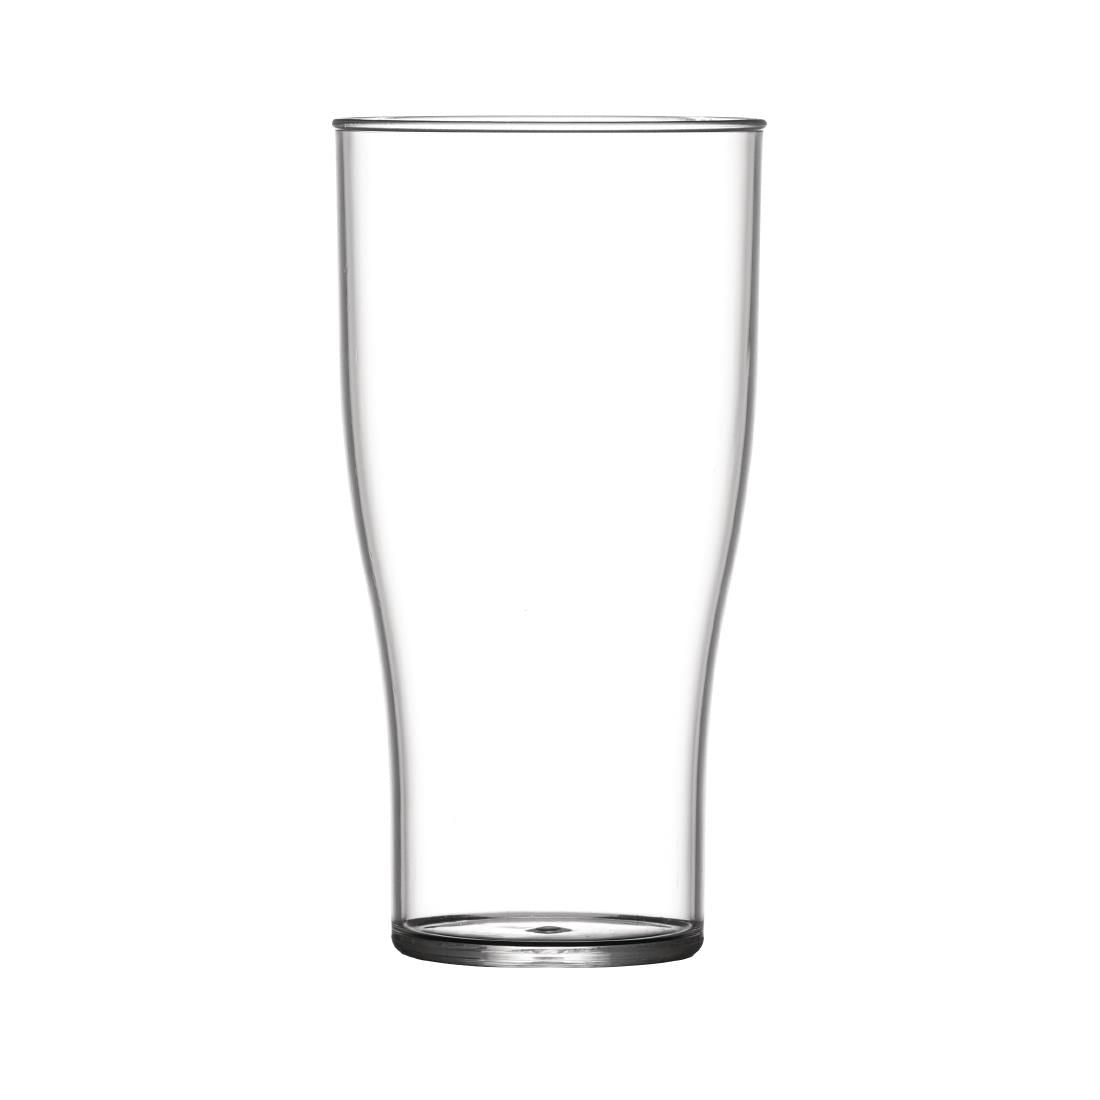 Bbp Polycarbonate Nucleated Half Pint Glasses Ce Marked Pack Of 48 Jd Catering Equipment